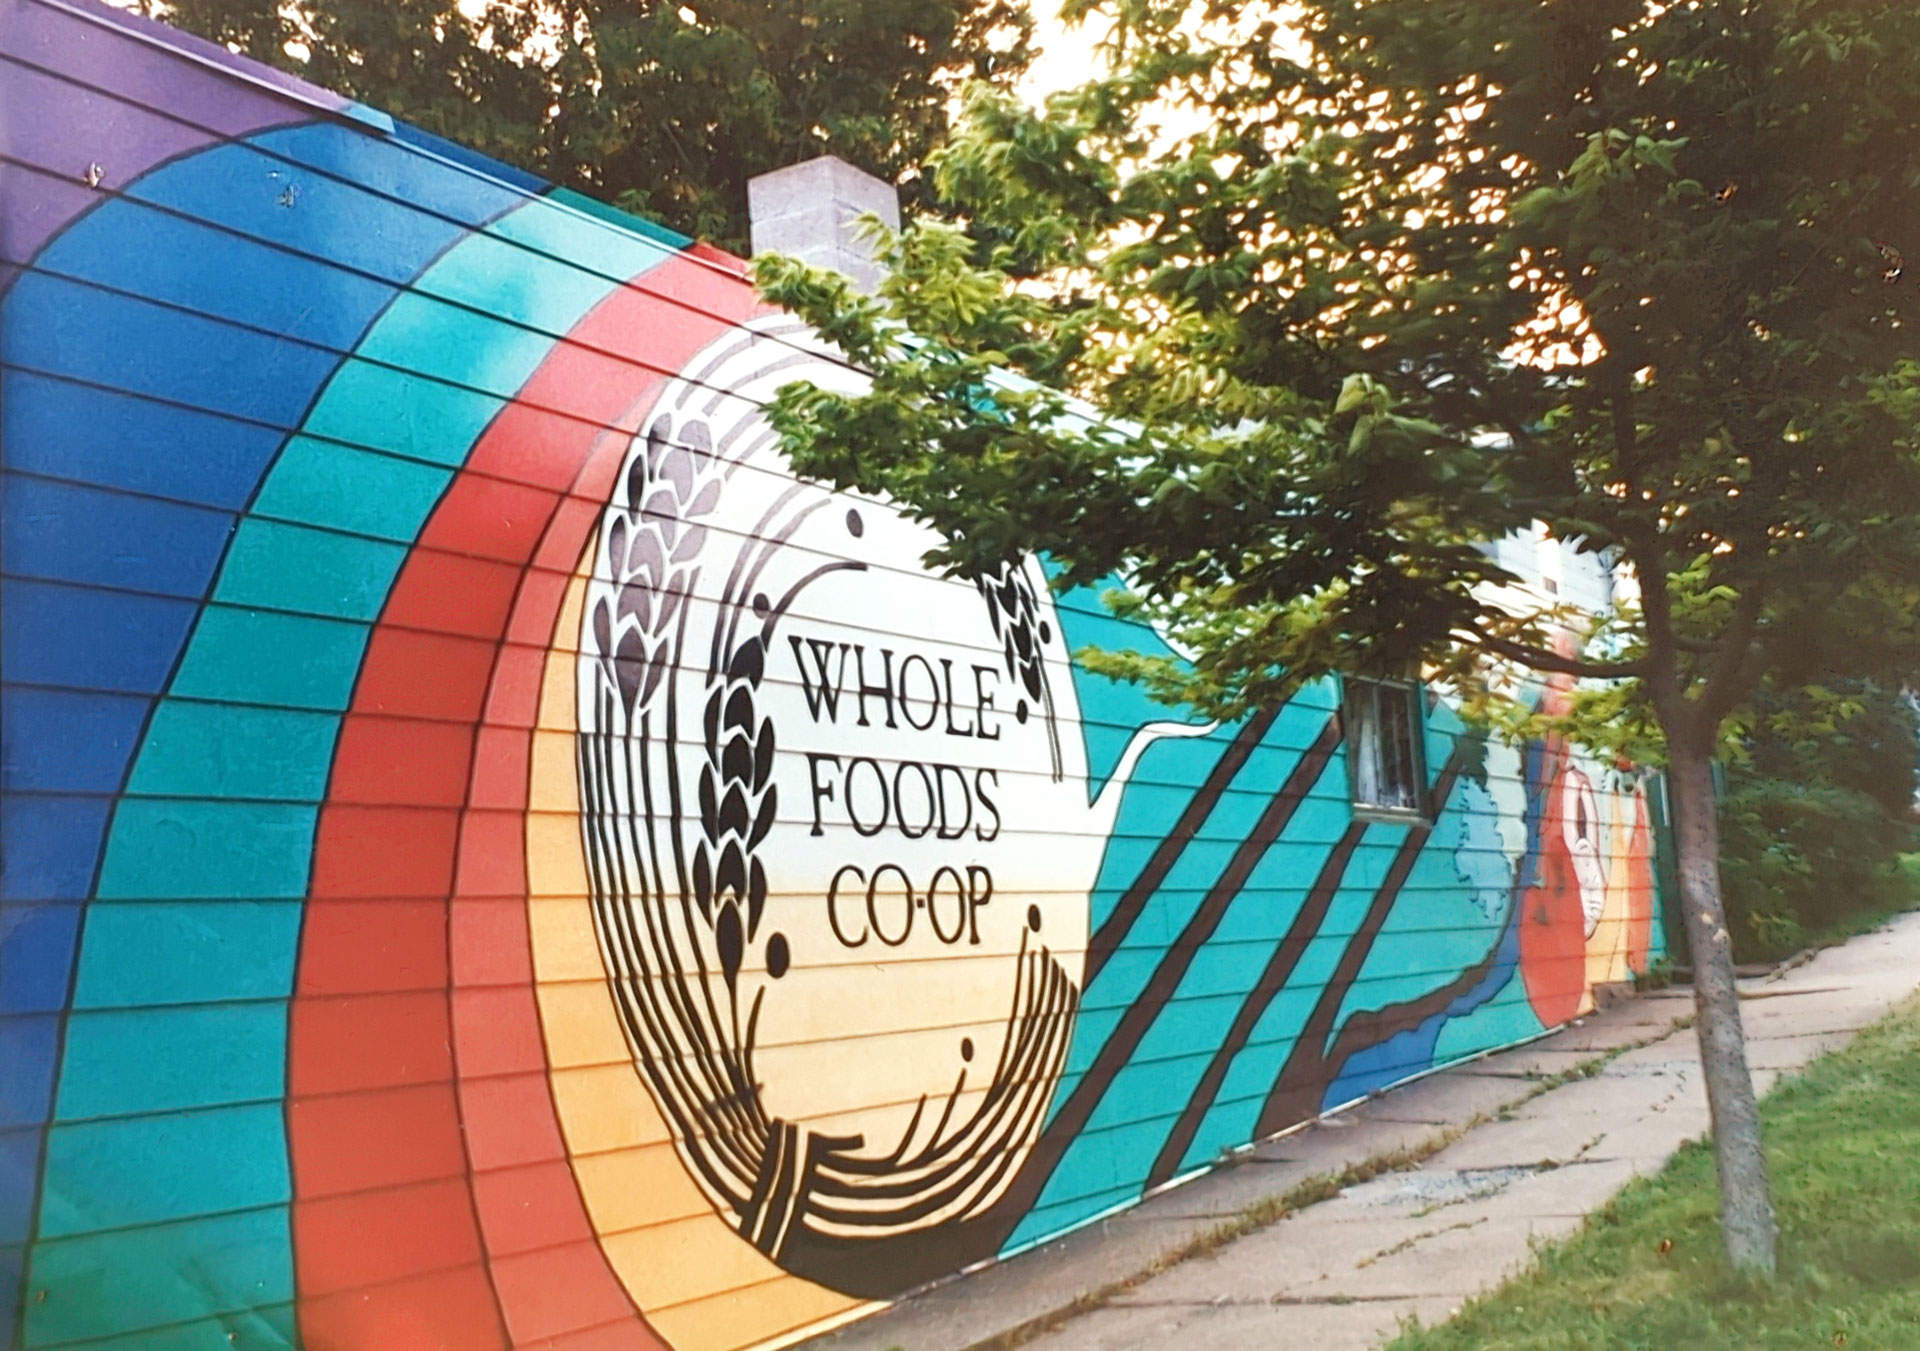 A bright, colorful mural with a circular "Whole Foods Coop Duluth MN" logo featuring wheat stalks is painted on the side of a building. Surrounding the logo are dynamic, curving lines in various shades of blue, green, and orange. There is a tree in front of the mural.